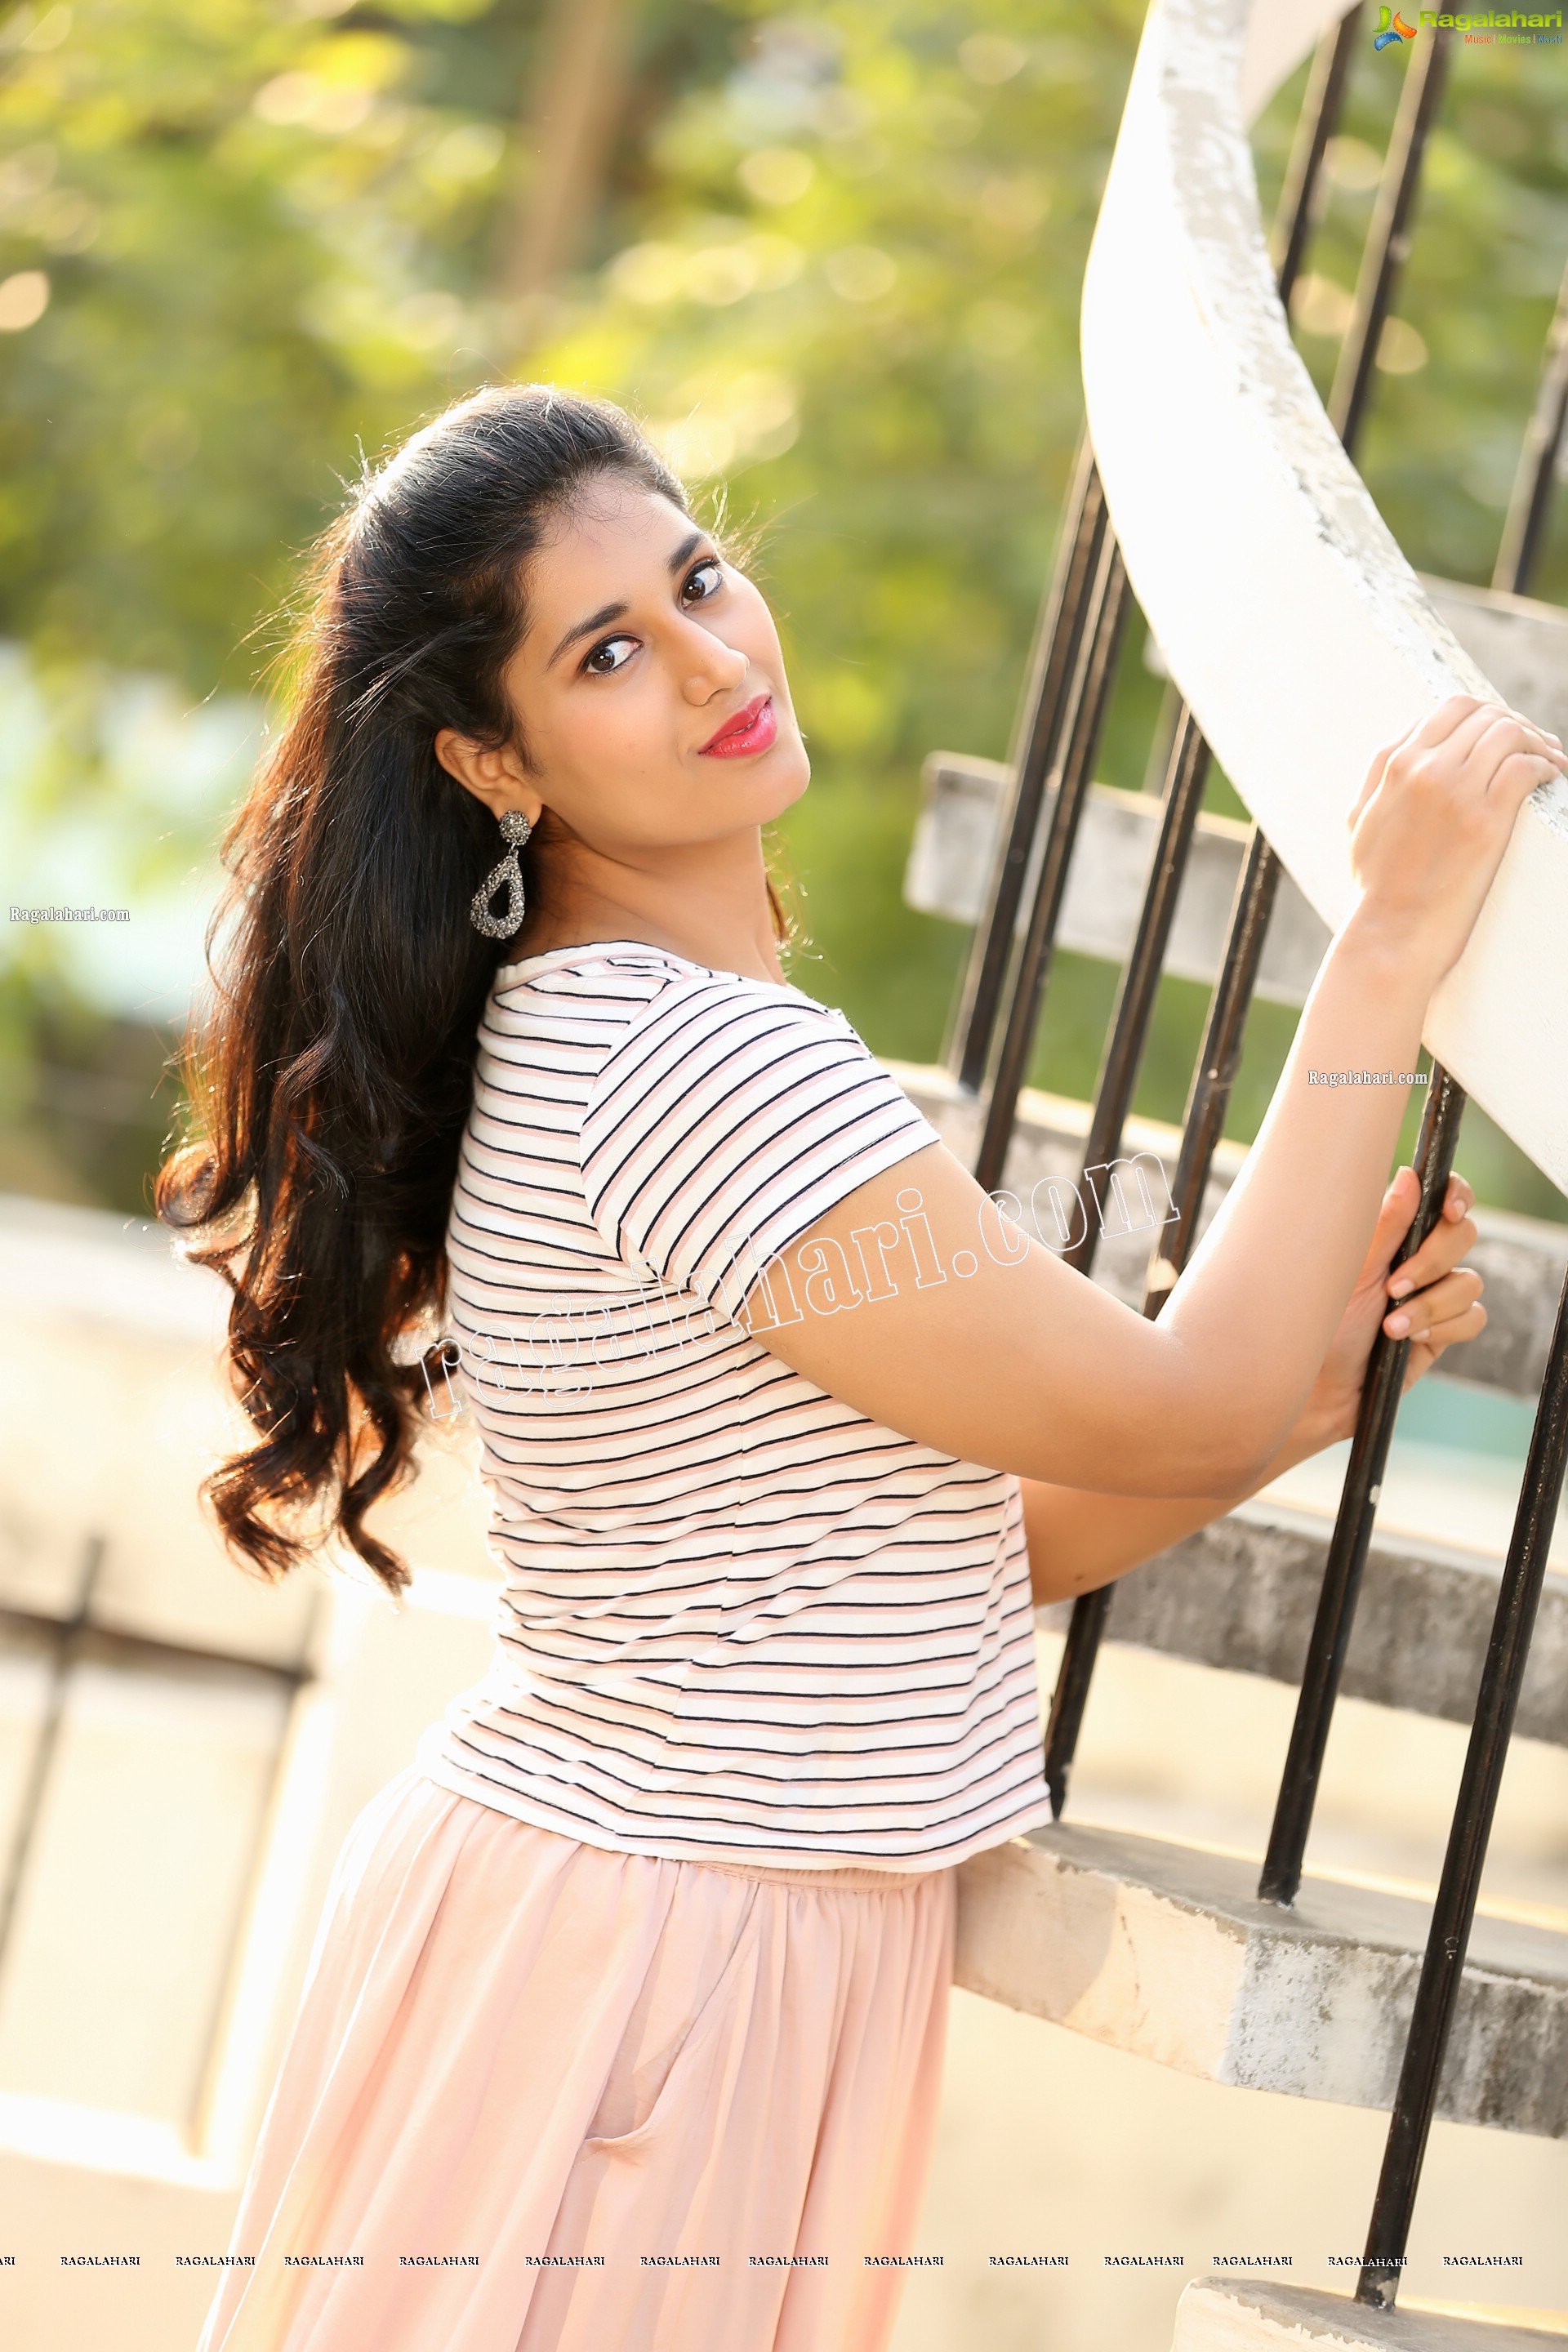 Akhila Ram in Pastel Pink Skirt and Stripes Top, Exclusive Photo Shoot